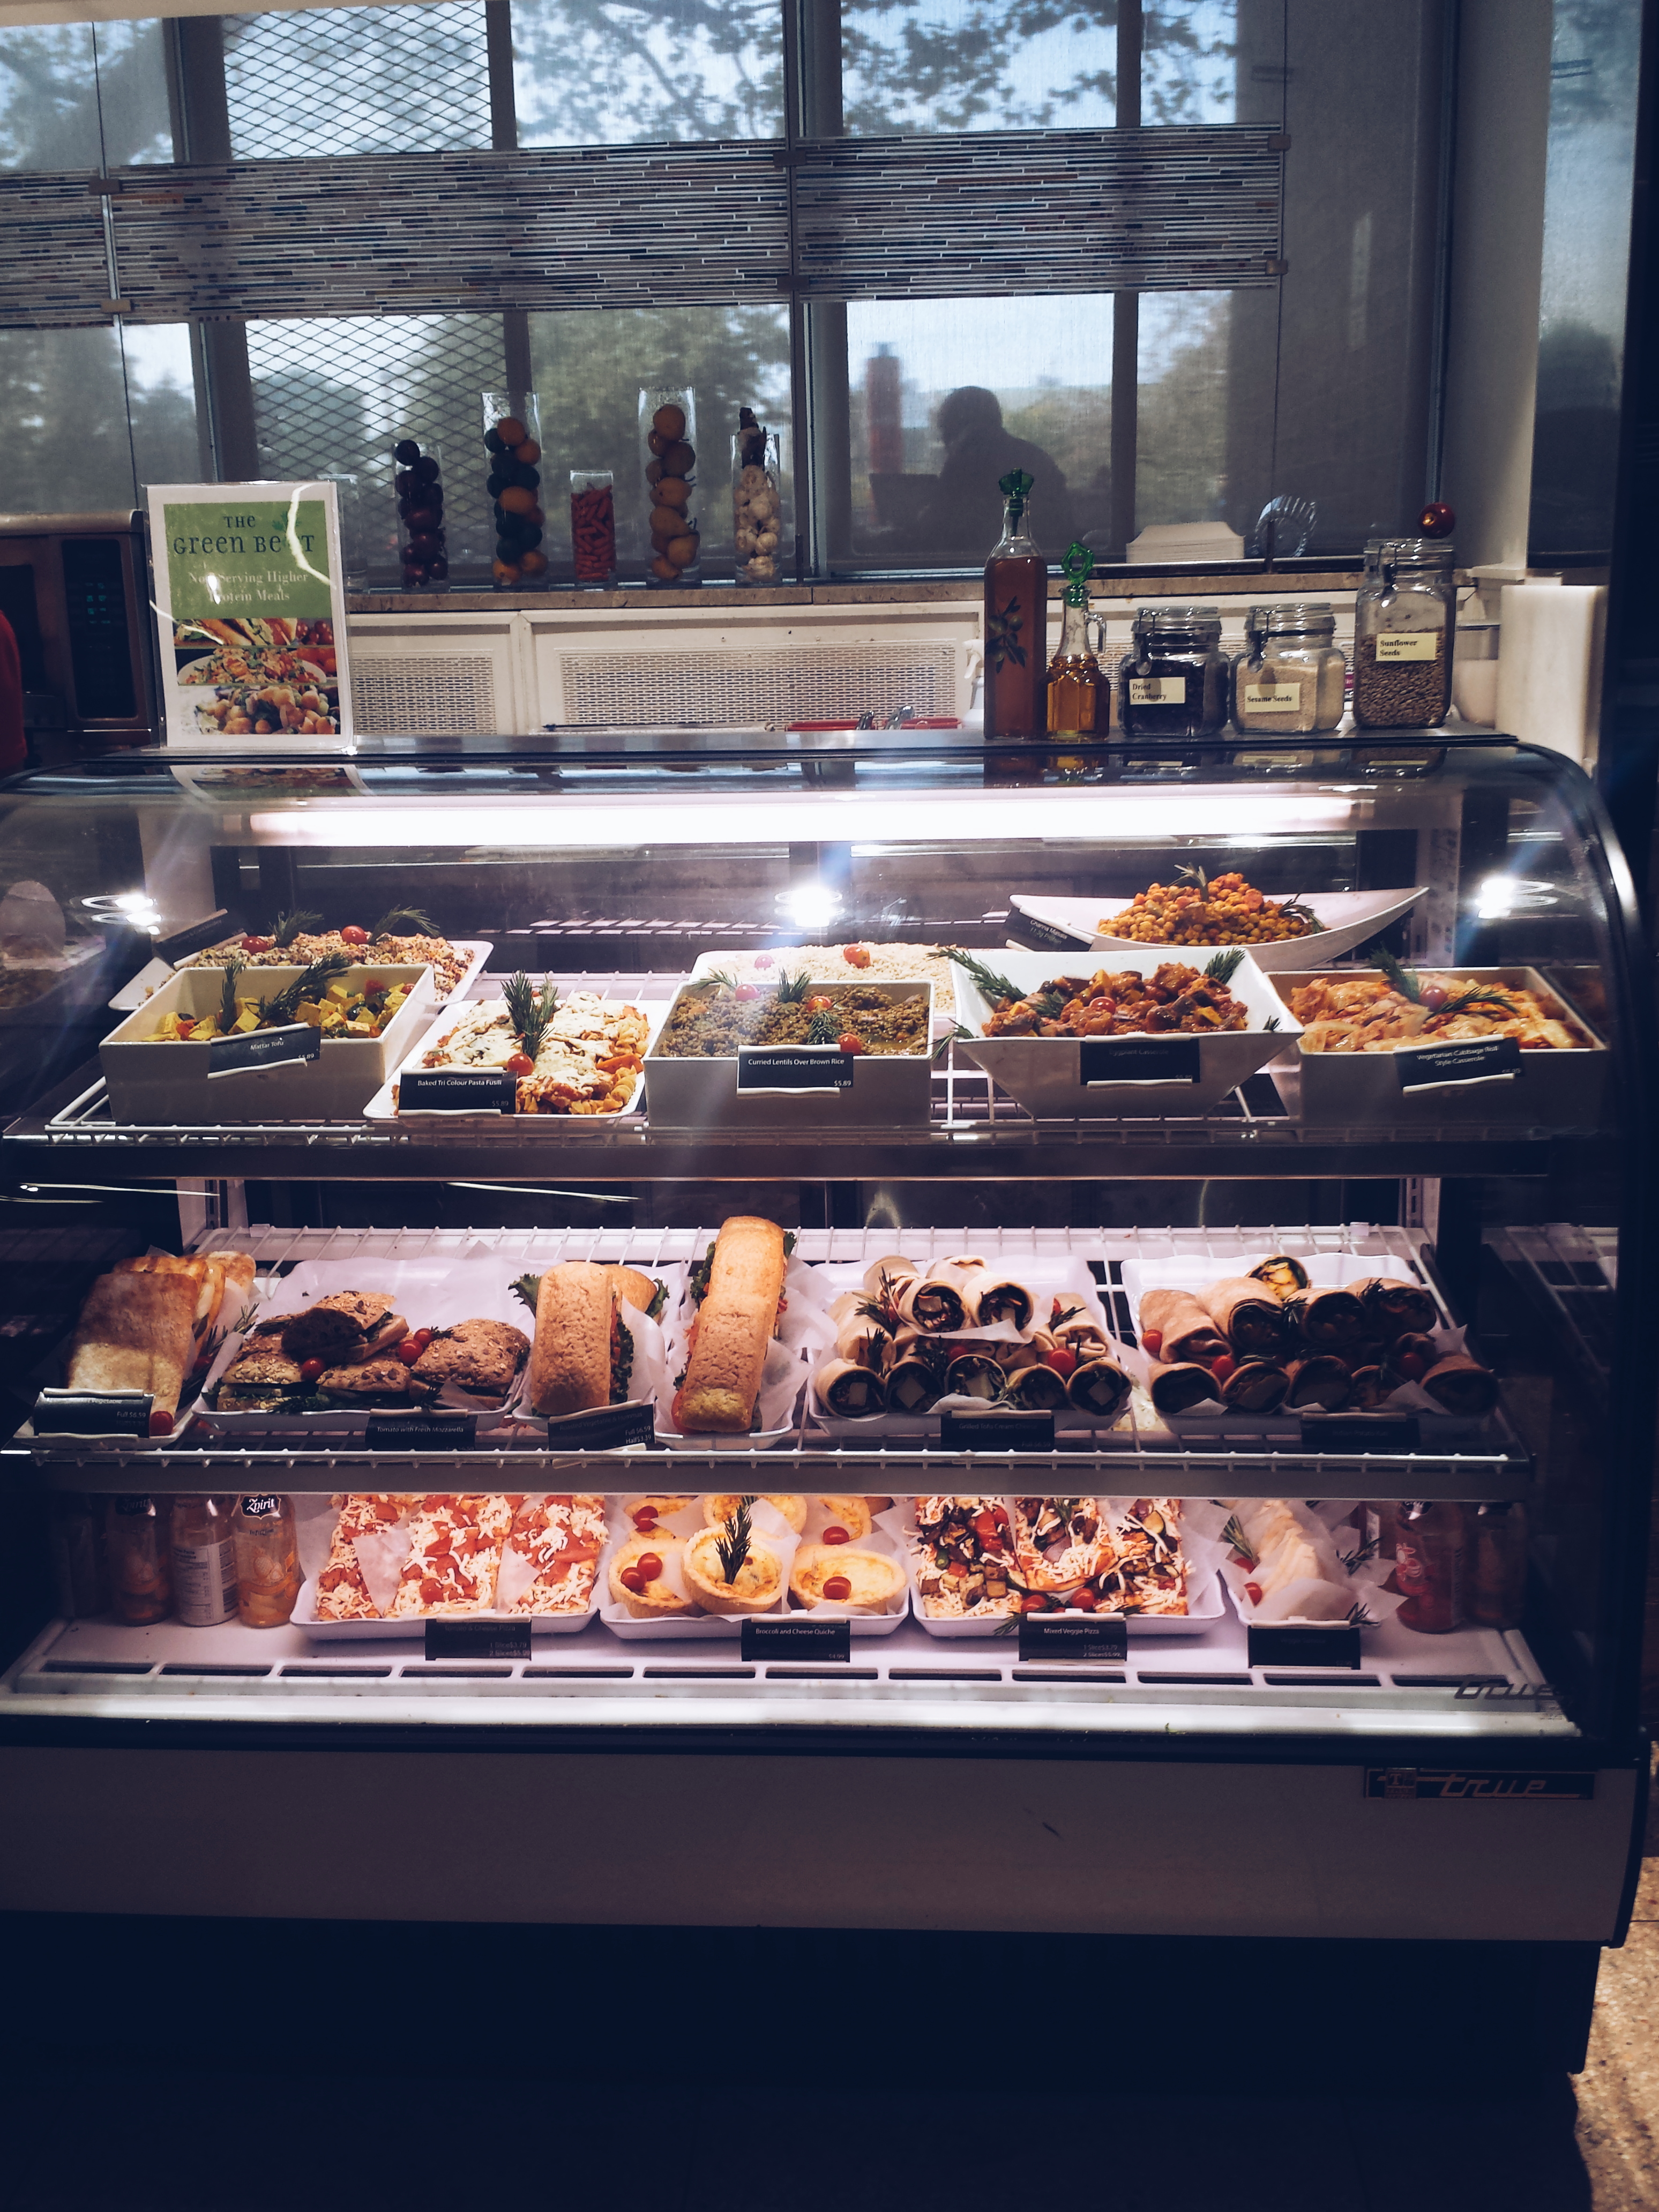 The glass case inside Green Beet housing all their delicious vegetarian options.